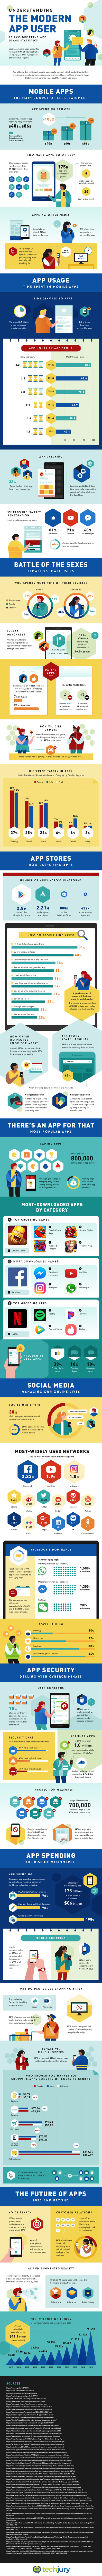 , 60+ Fascinating Smartphone Apps Usage Statistics For 2019 [Infographic], TornCRM